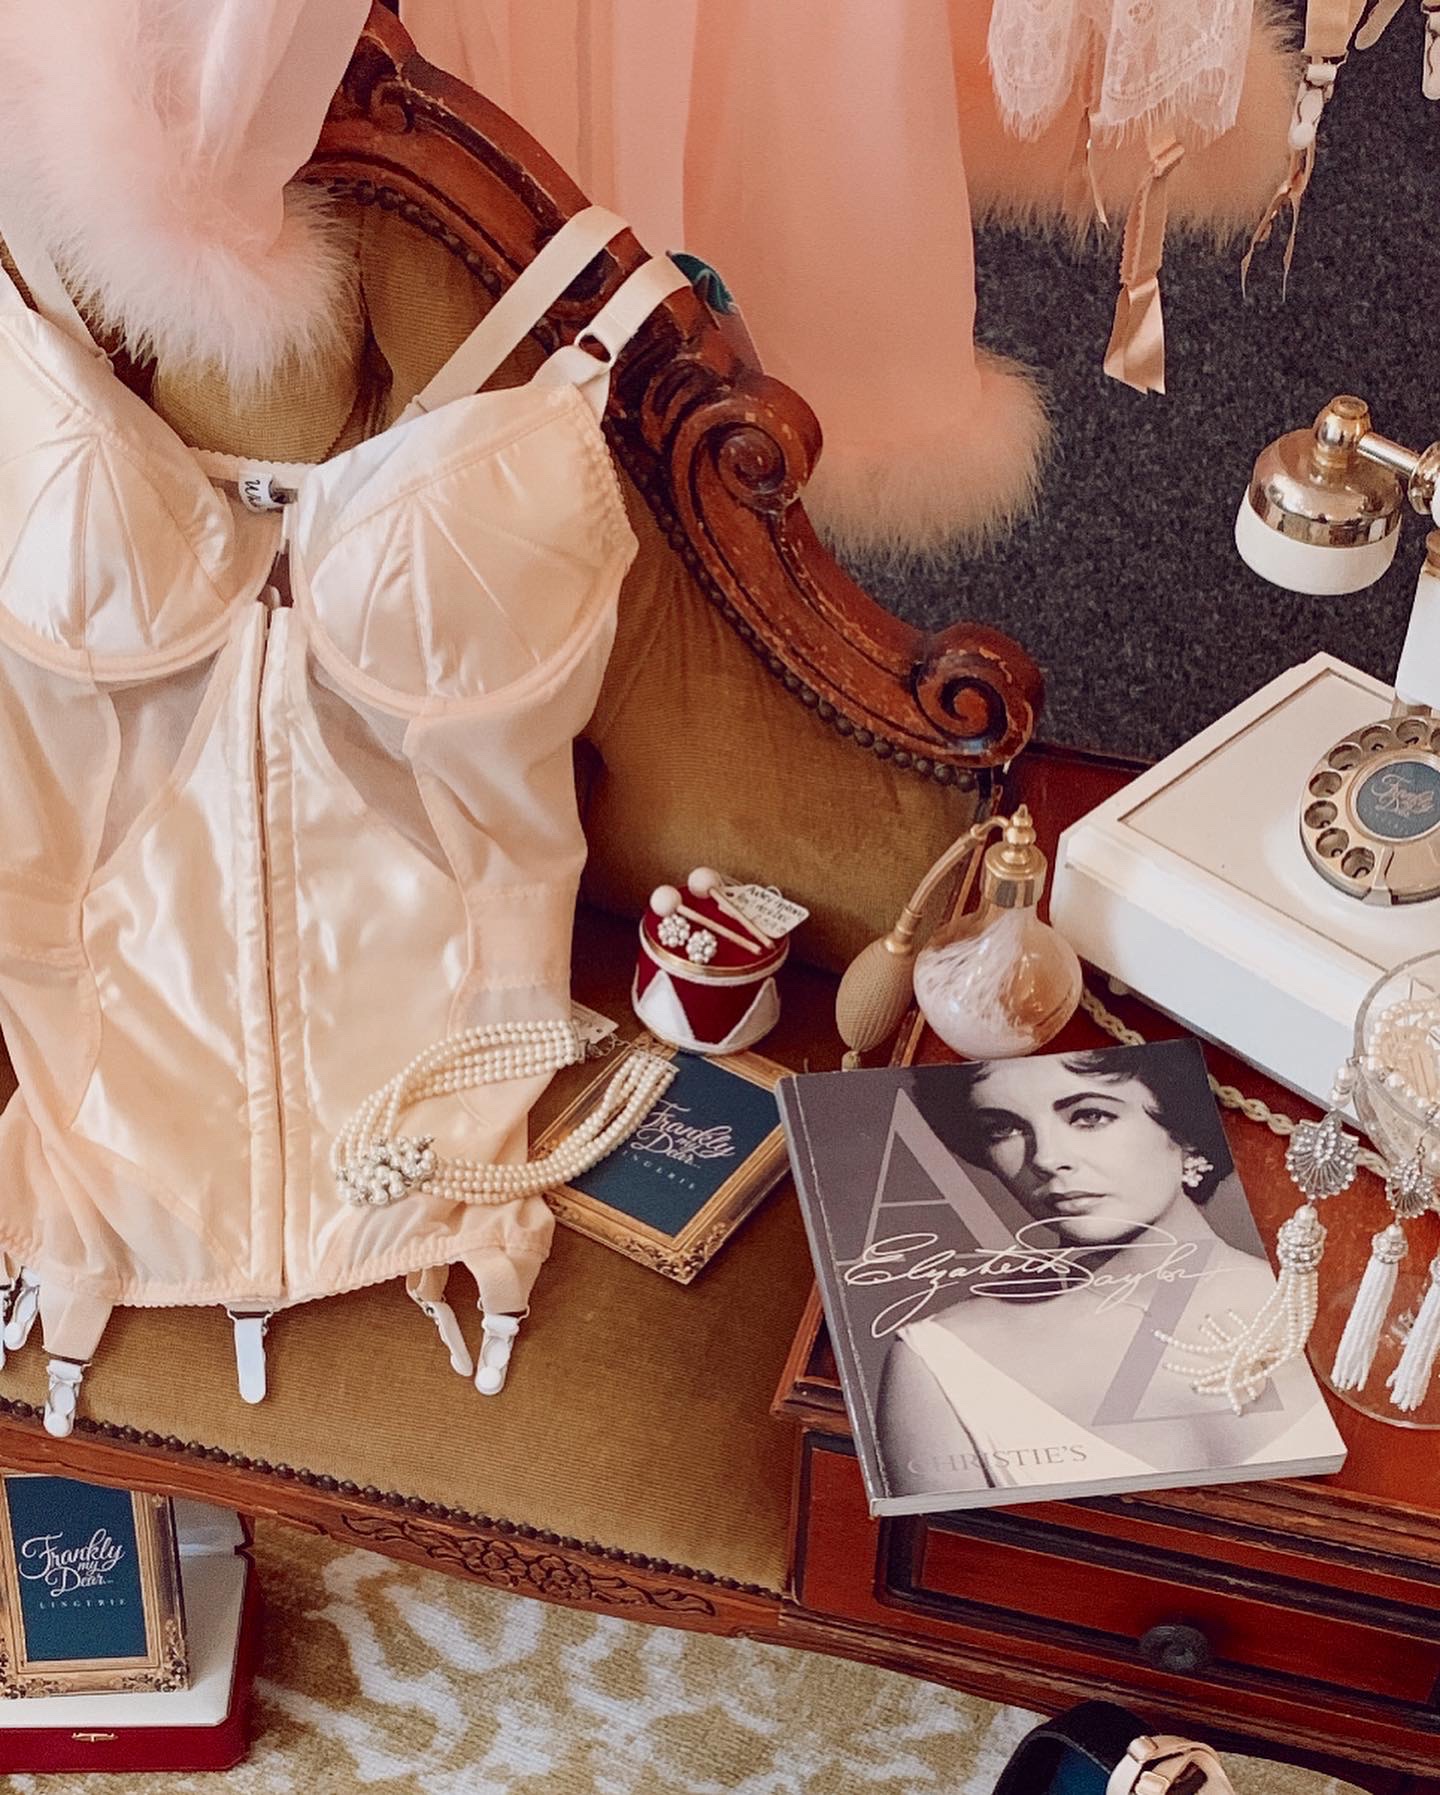 What Katie Did Peach corselette on vintage style telephone table with vintage telephone and Elizabeth Taylor book